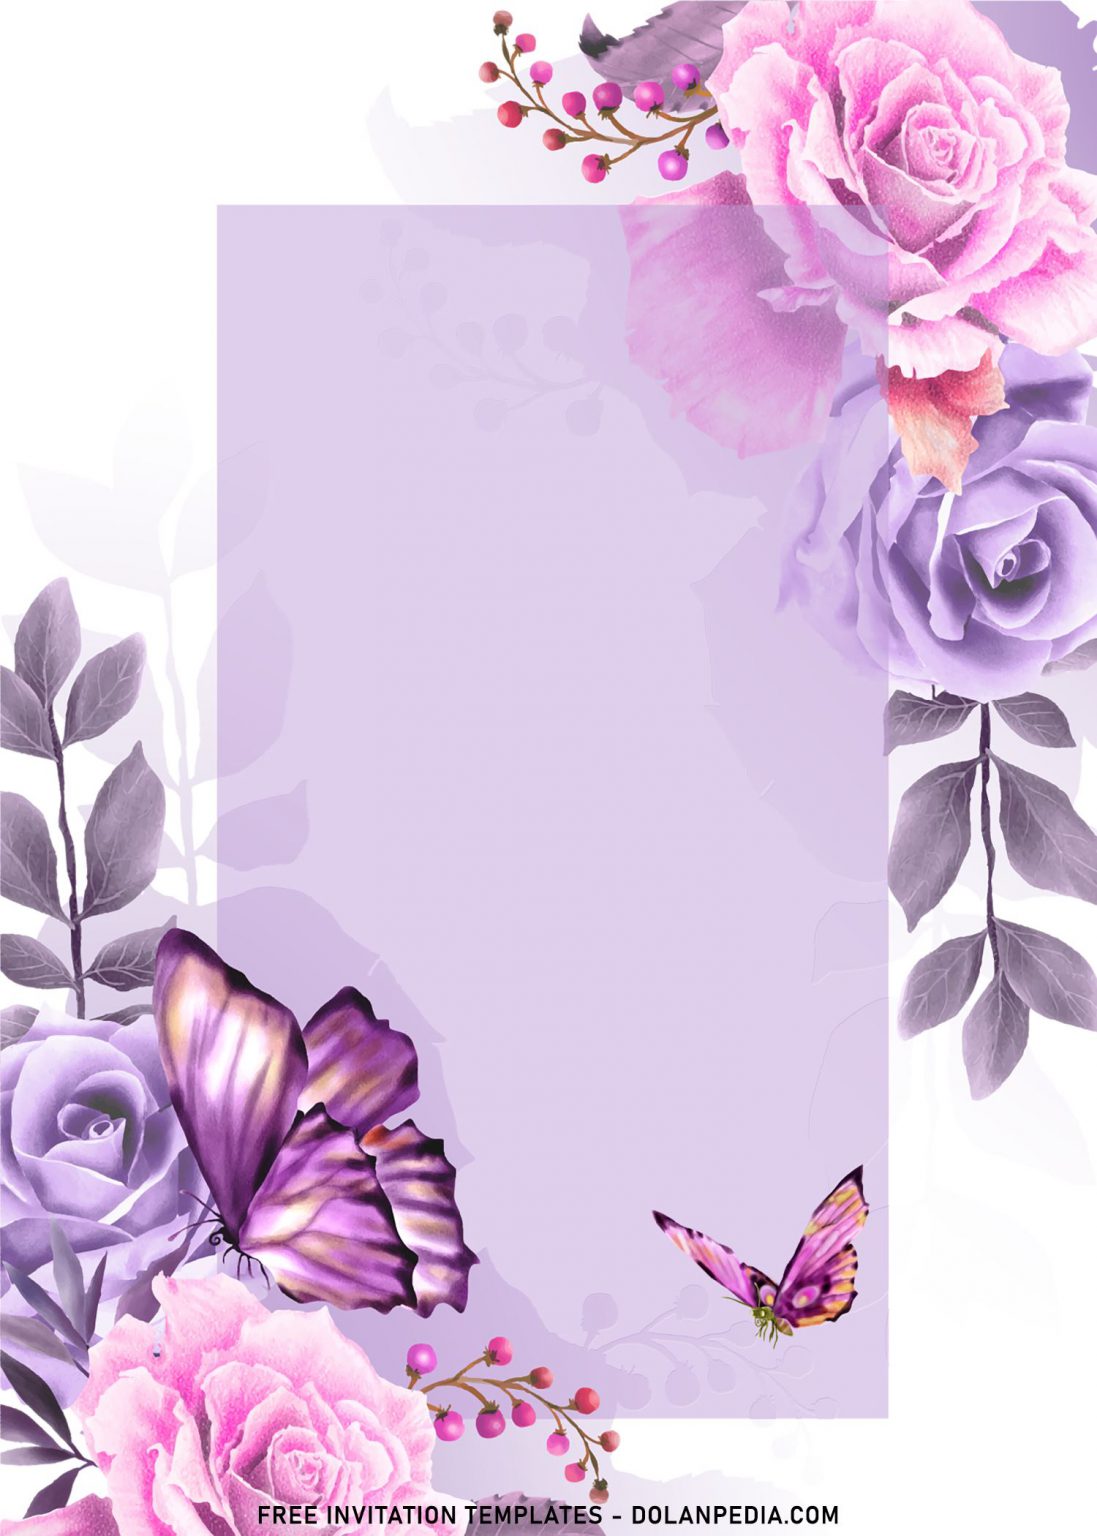 8-aesthetic-floral-and-butterfly-birthday-invitation-templates